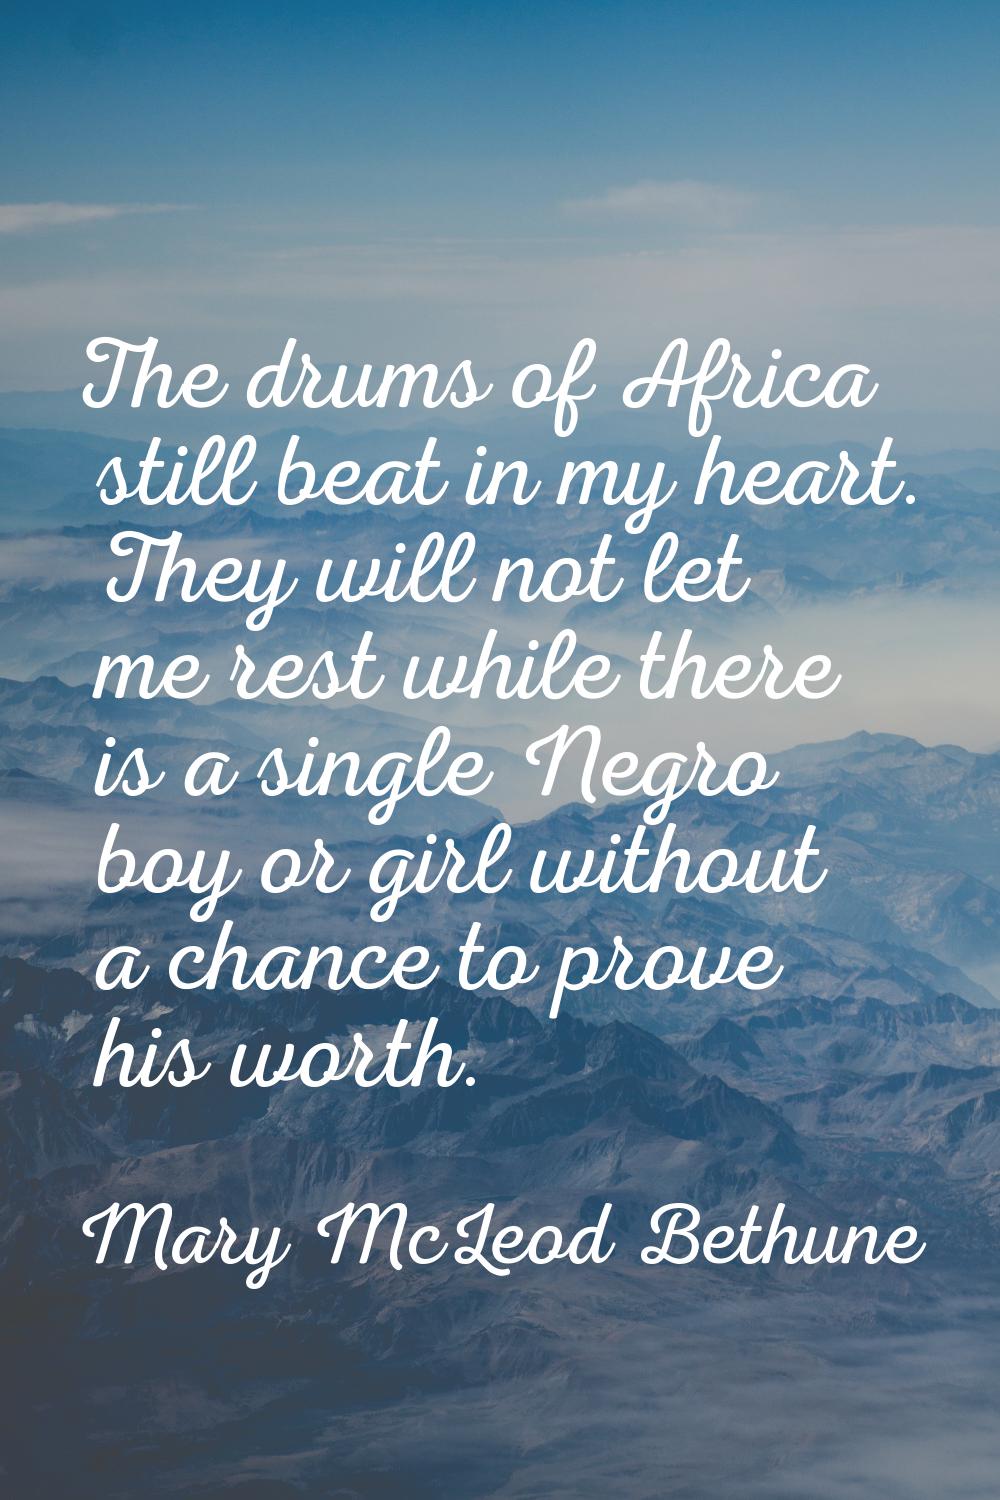 The drums of Africa still beat in my heart. They will not let me rest while there is a single Negro